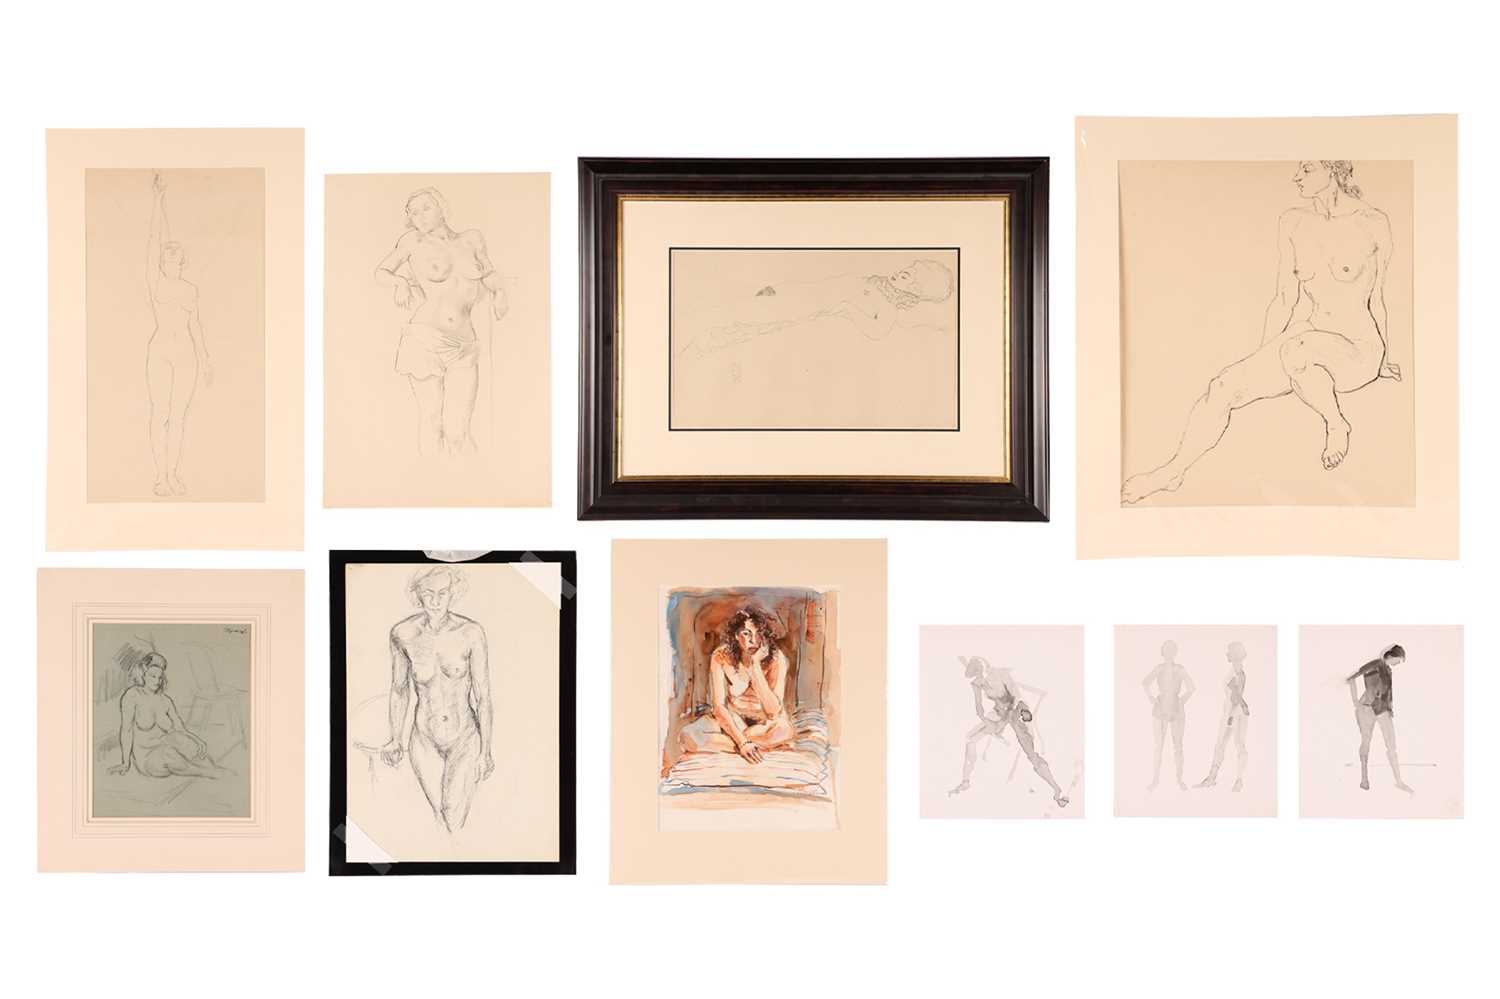 Clifford Hall (1904 - 1973), Study of a seated female nude, signed 'Clifford Hall' in pen (top right